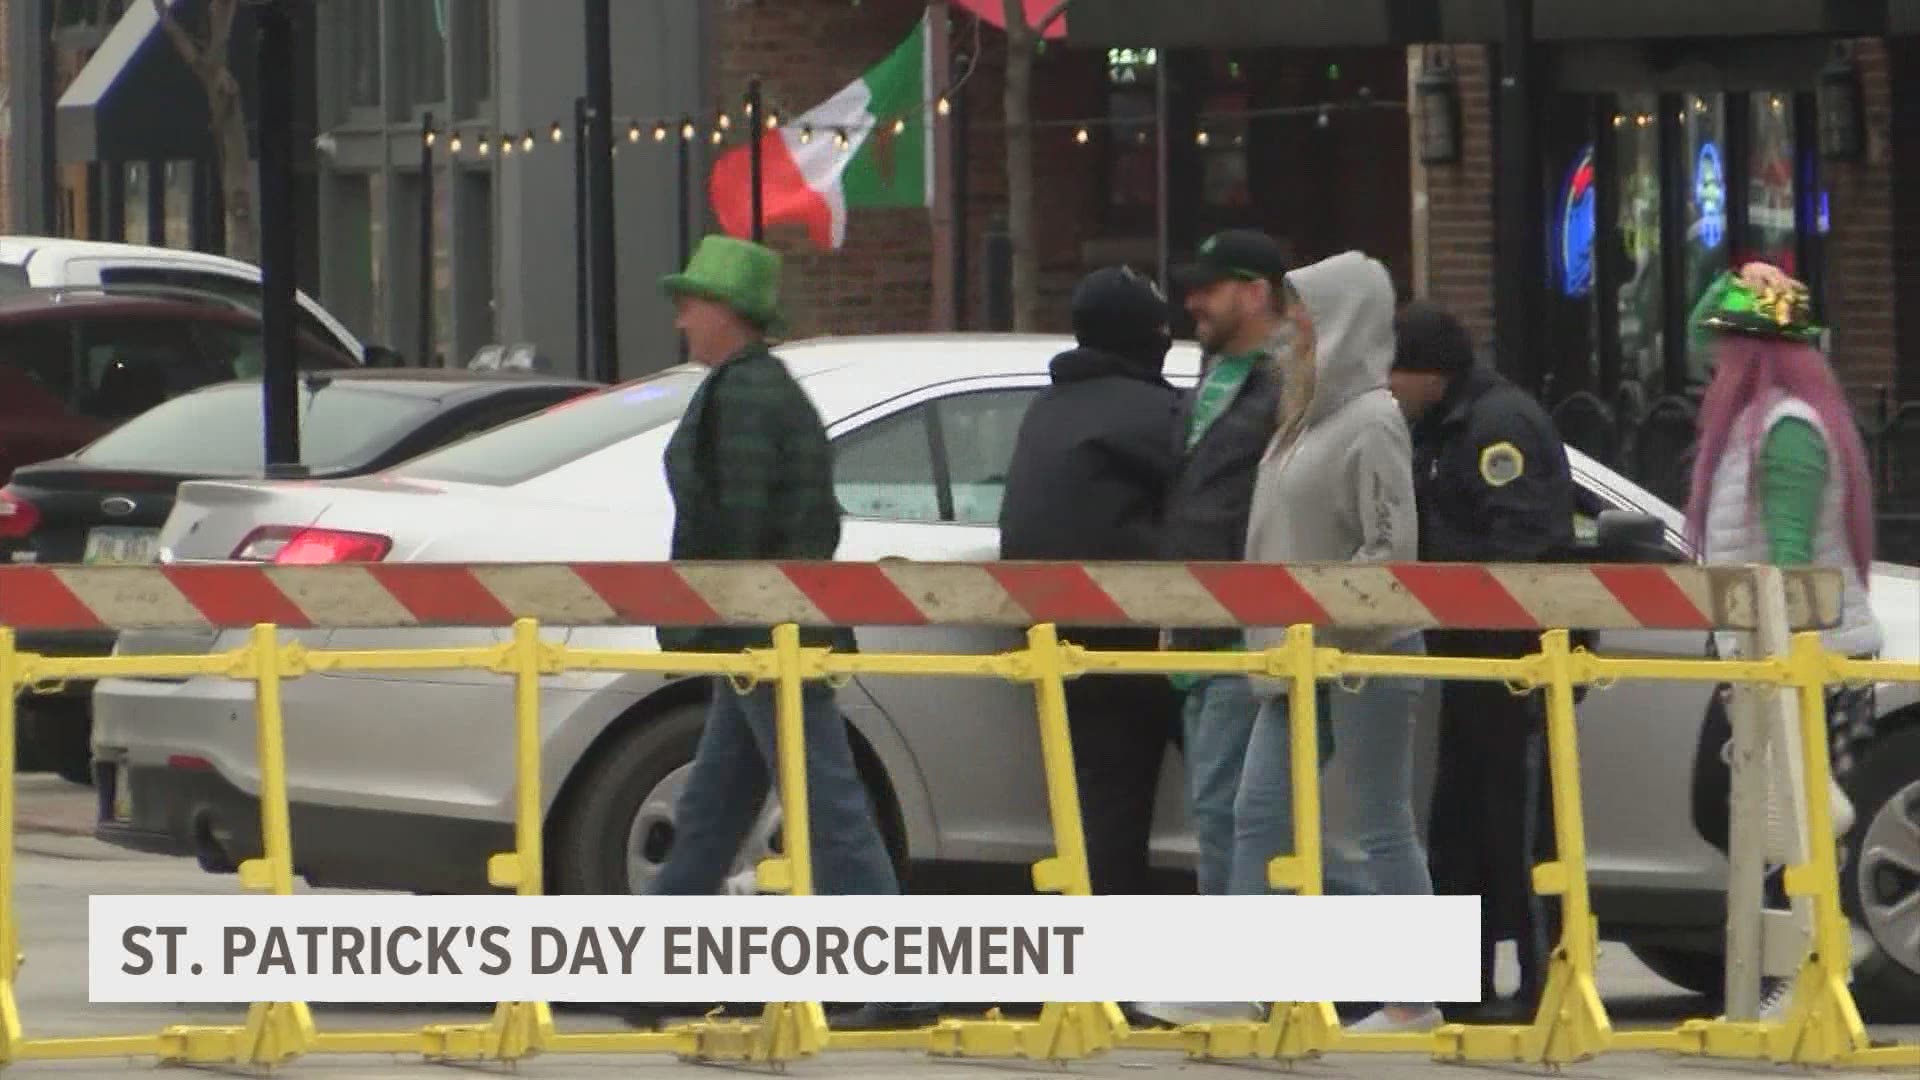 Drunk driving is always a concern during St. Patrick's Day, but now there's an added risk with the COVID-19 pandemic.